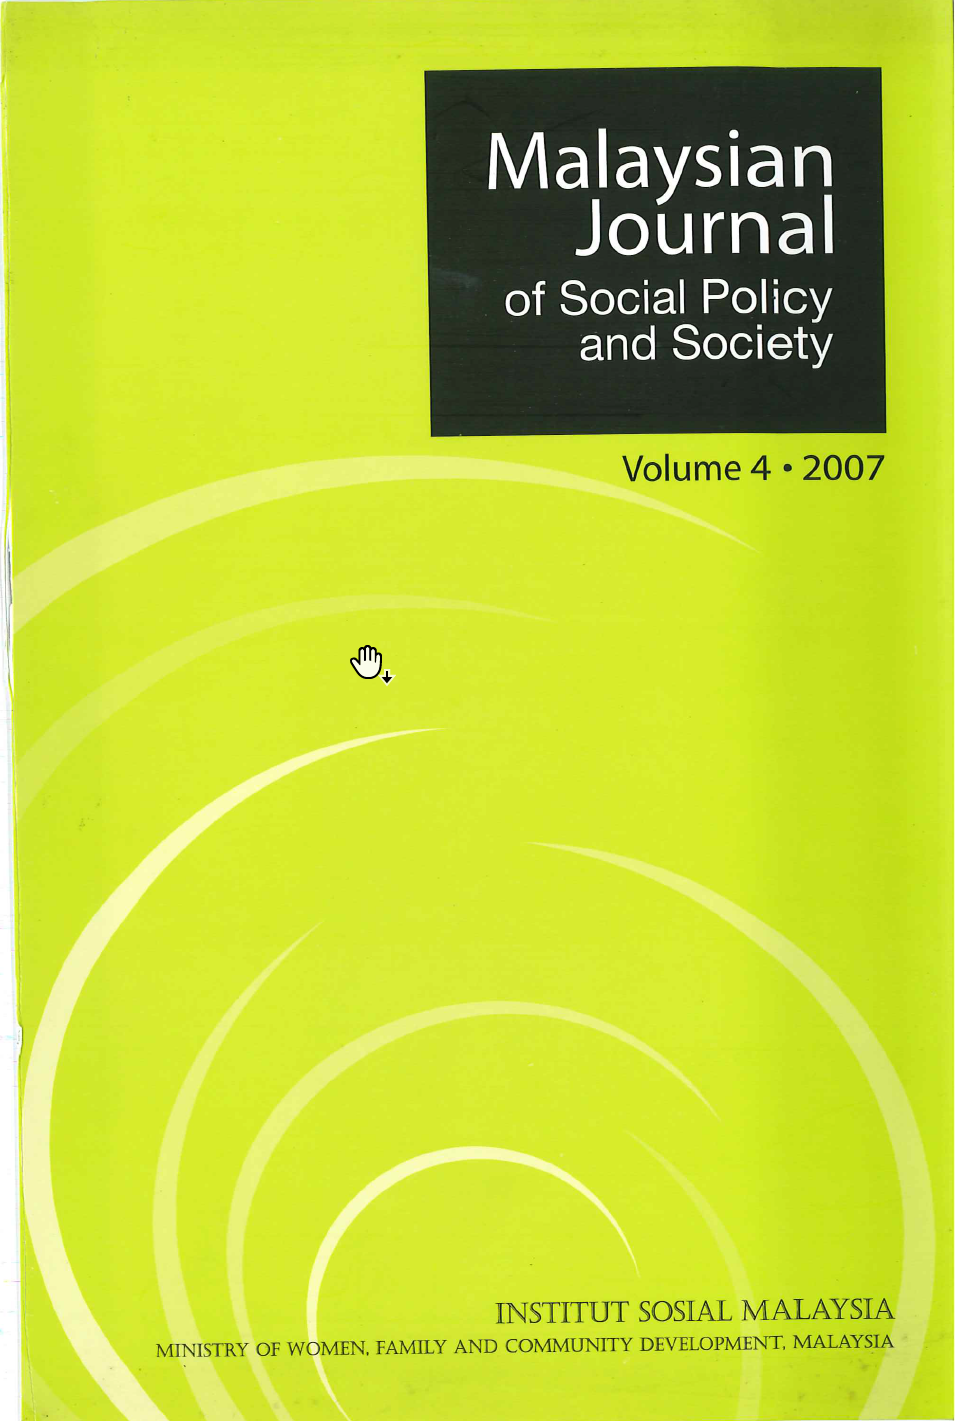 					View Vol. 4 (2007): Malaysian Journal of Social Policy and Society Volume 4 2007
				